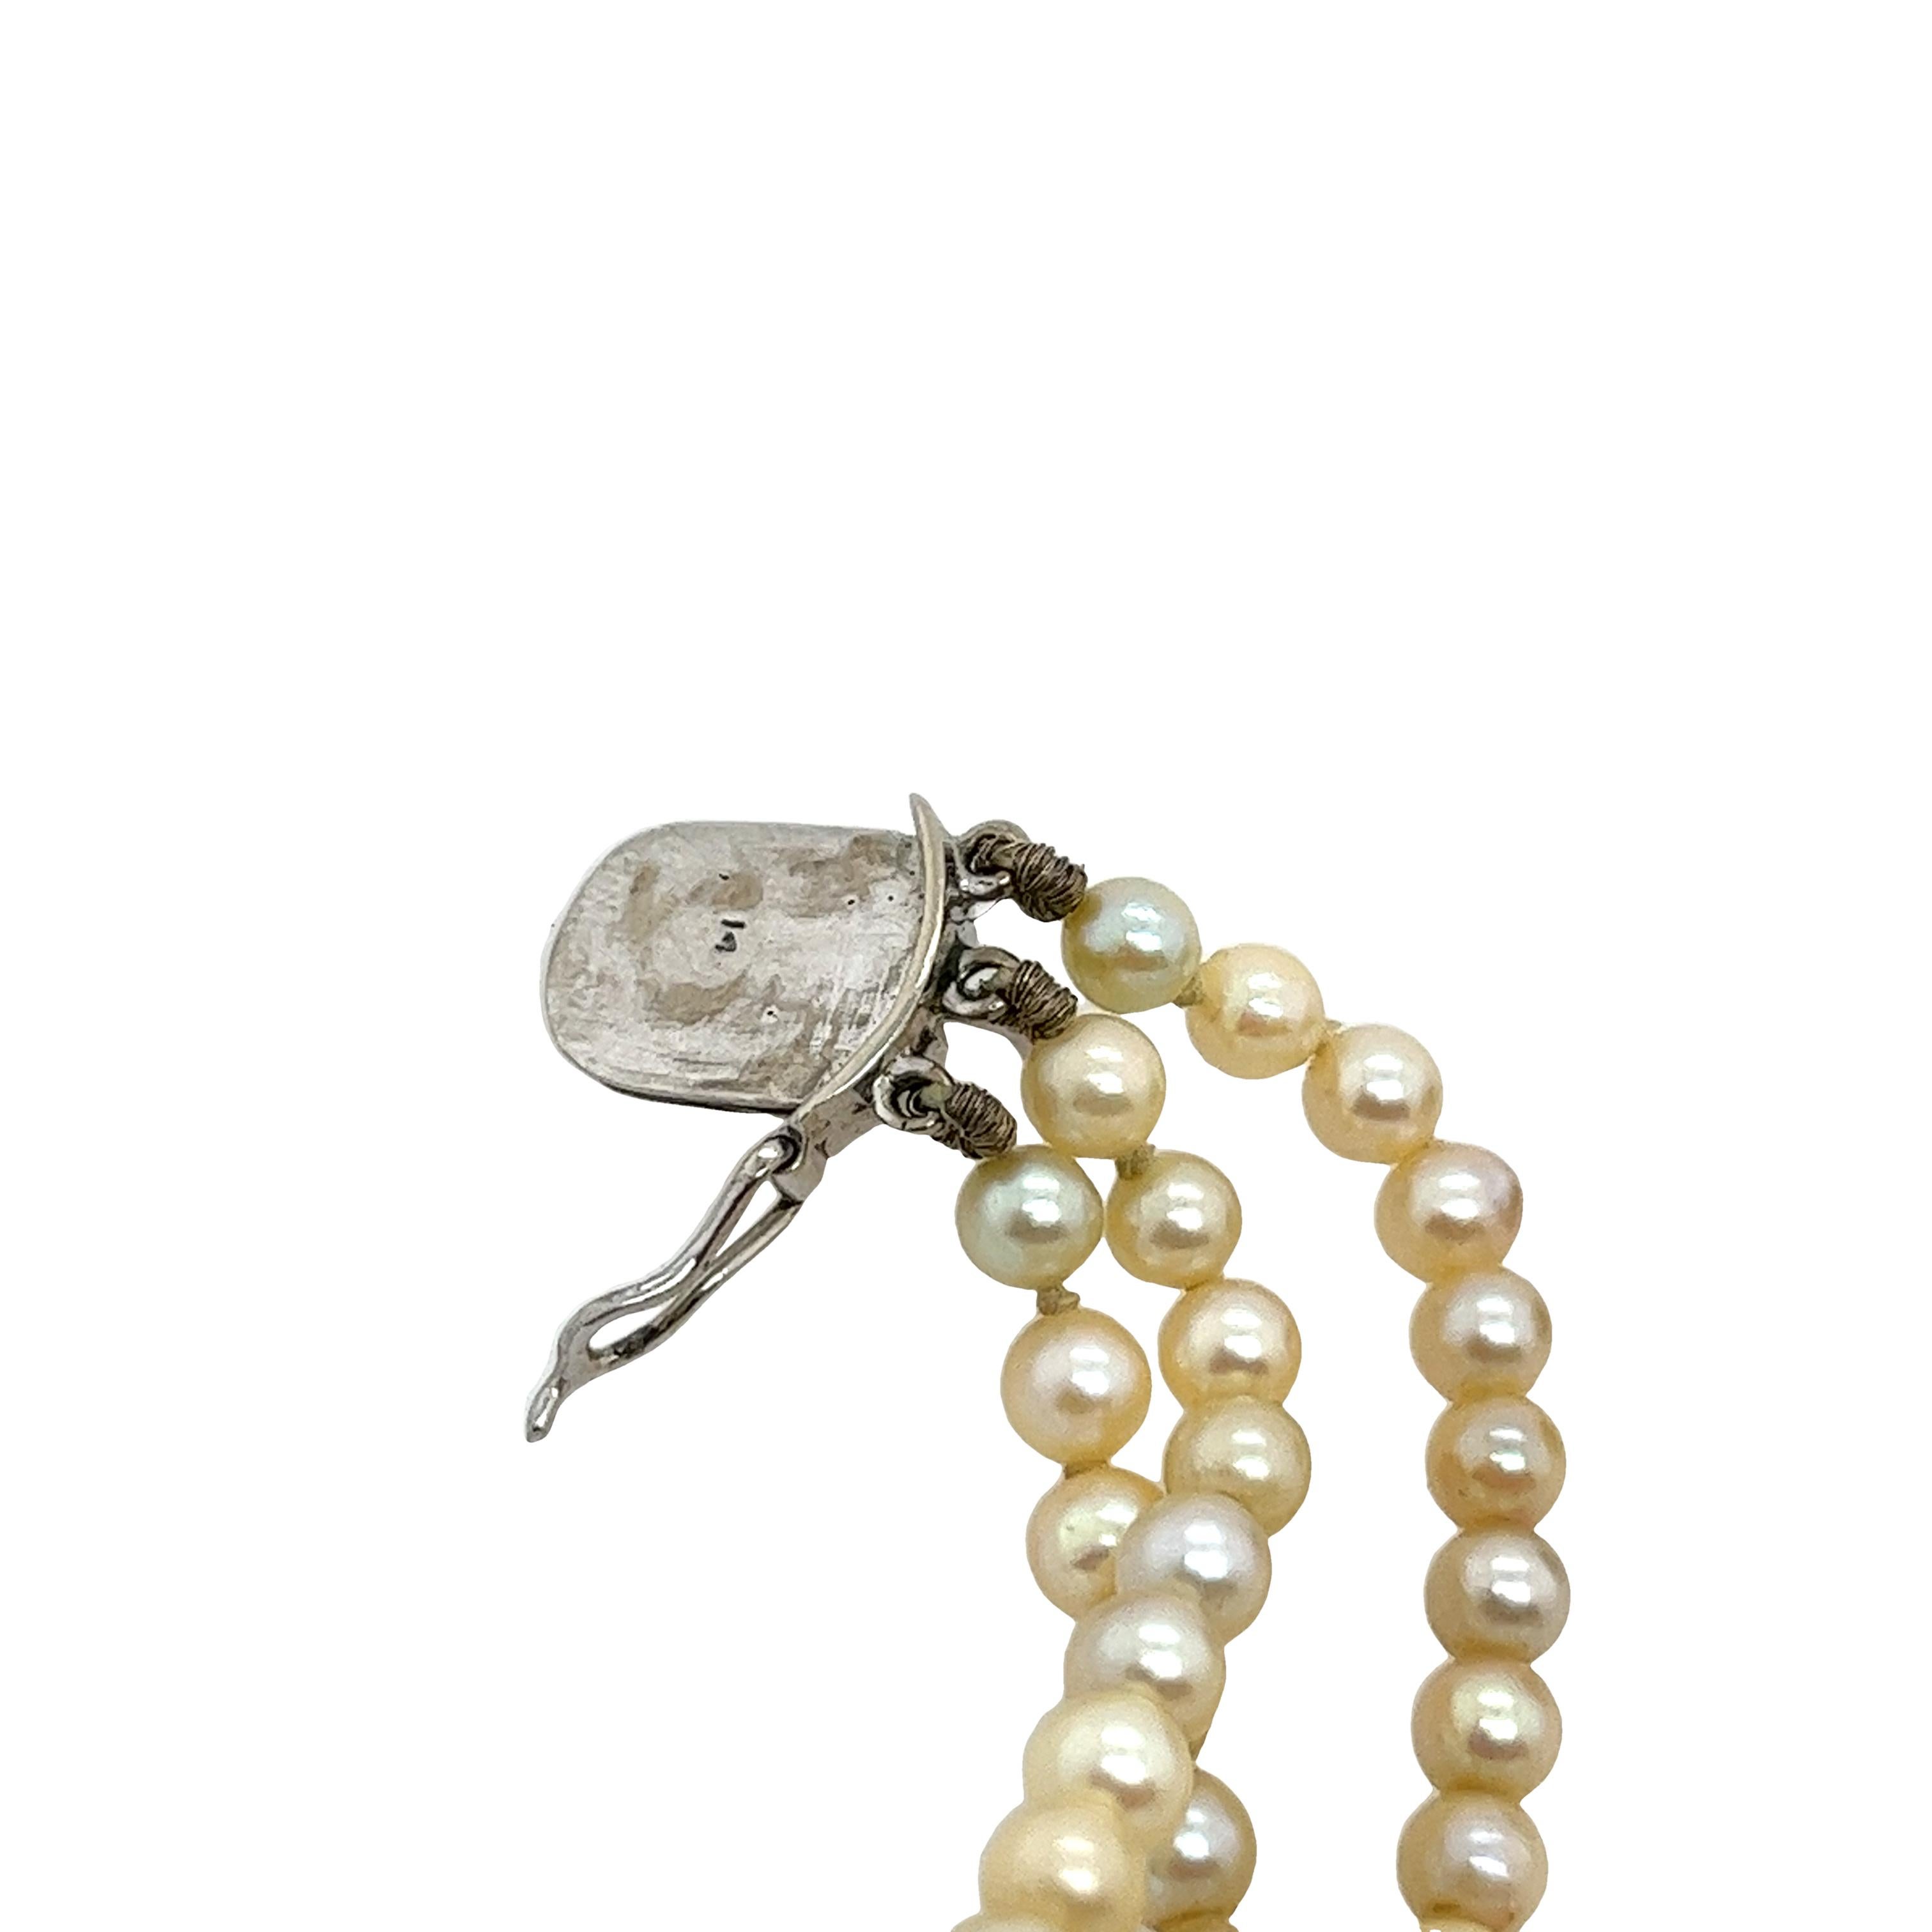 This beautiful vintage 3-row 7.3mm-3.55mm cultured pearl necklace is set with a 14ct white gold clasp 
set with 0.46ct old cut diamonds. The total length is 16.5